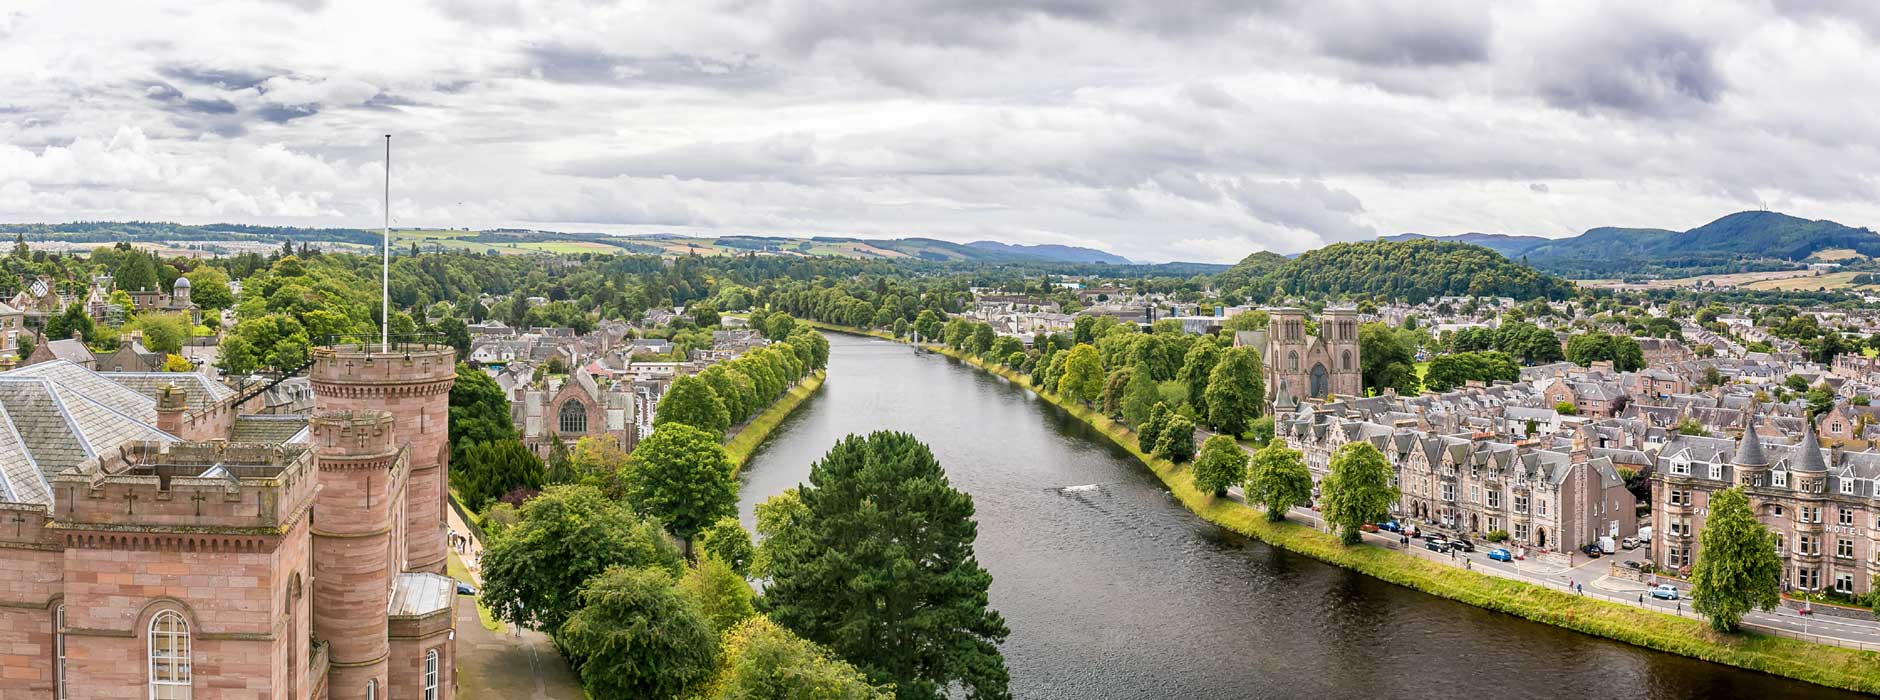 View of River Ness and Inverness city